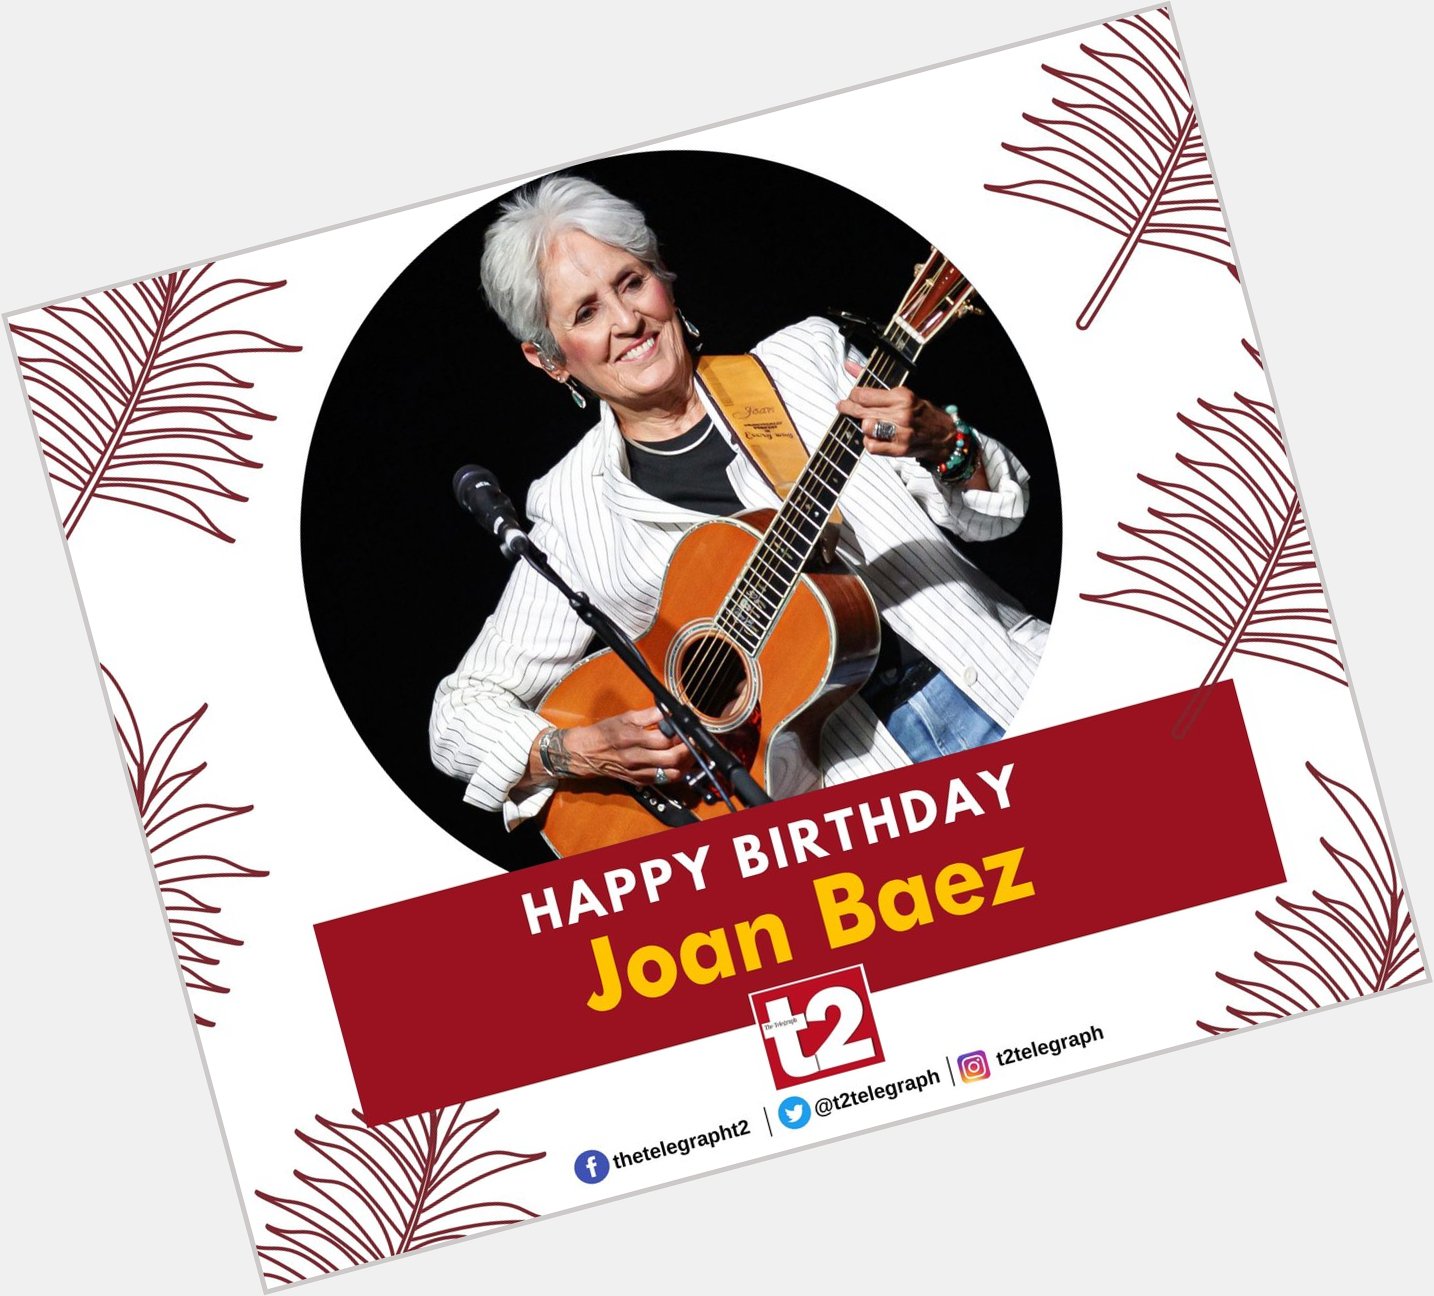 Happy birthday Joan Baez and thank you for making music that always speaks to the heart 